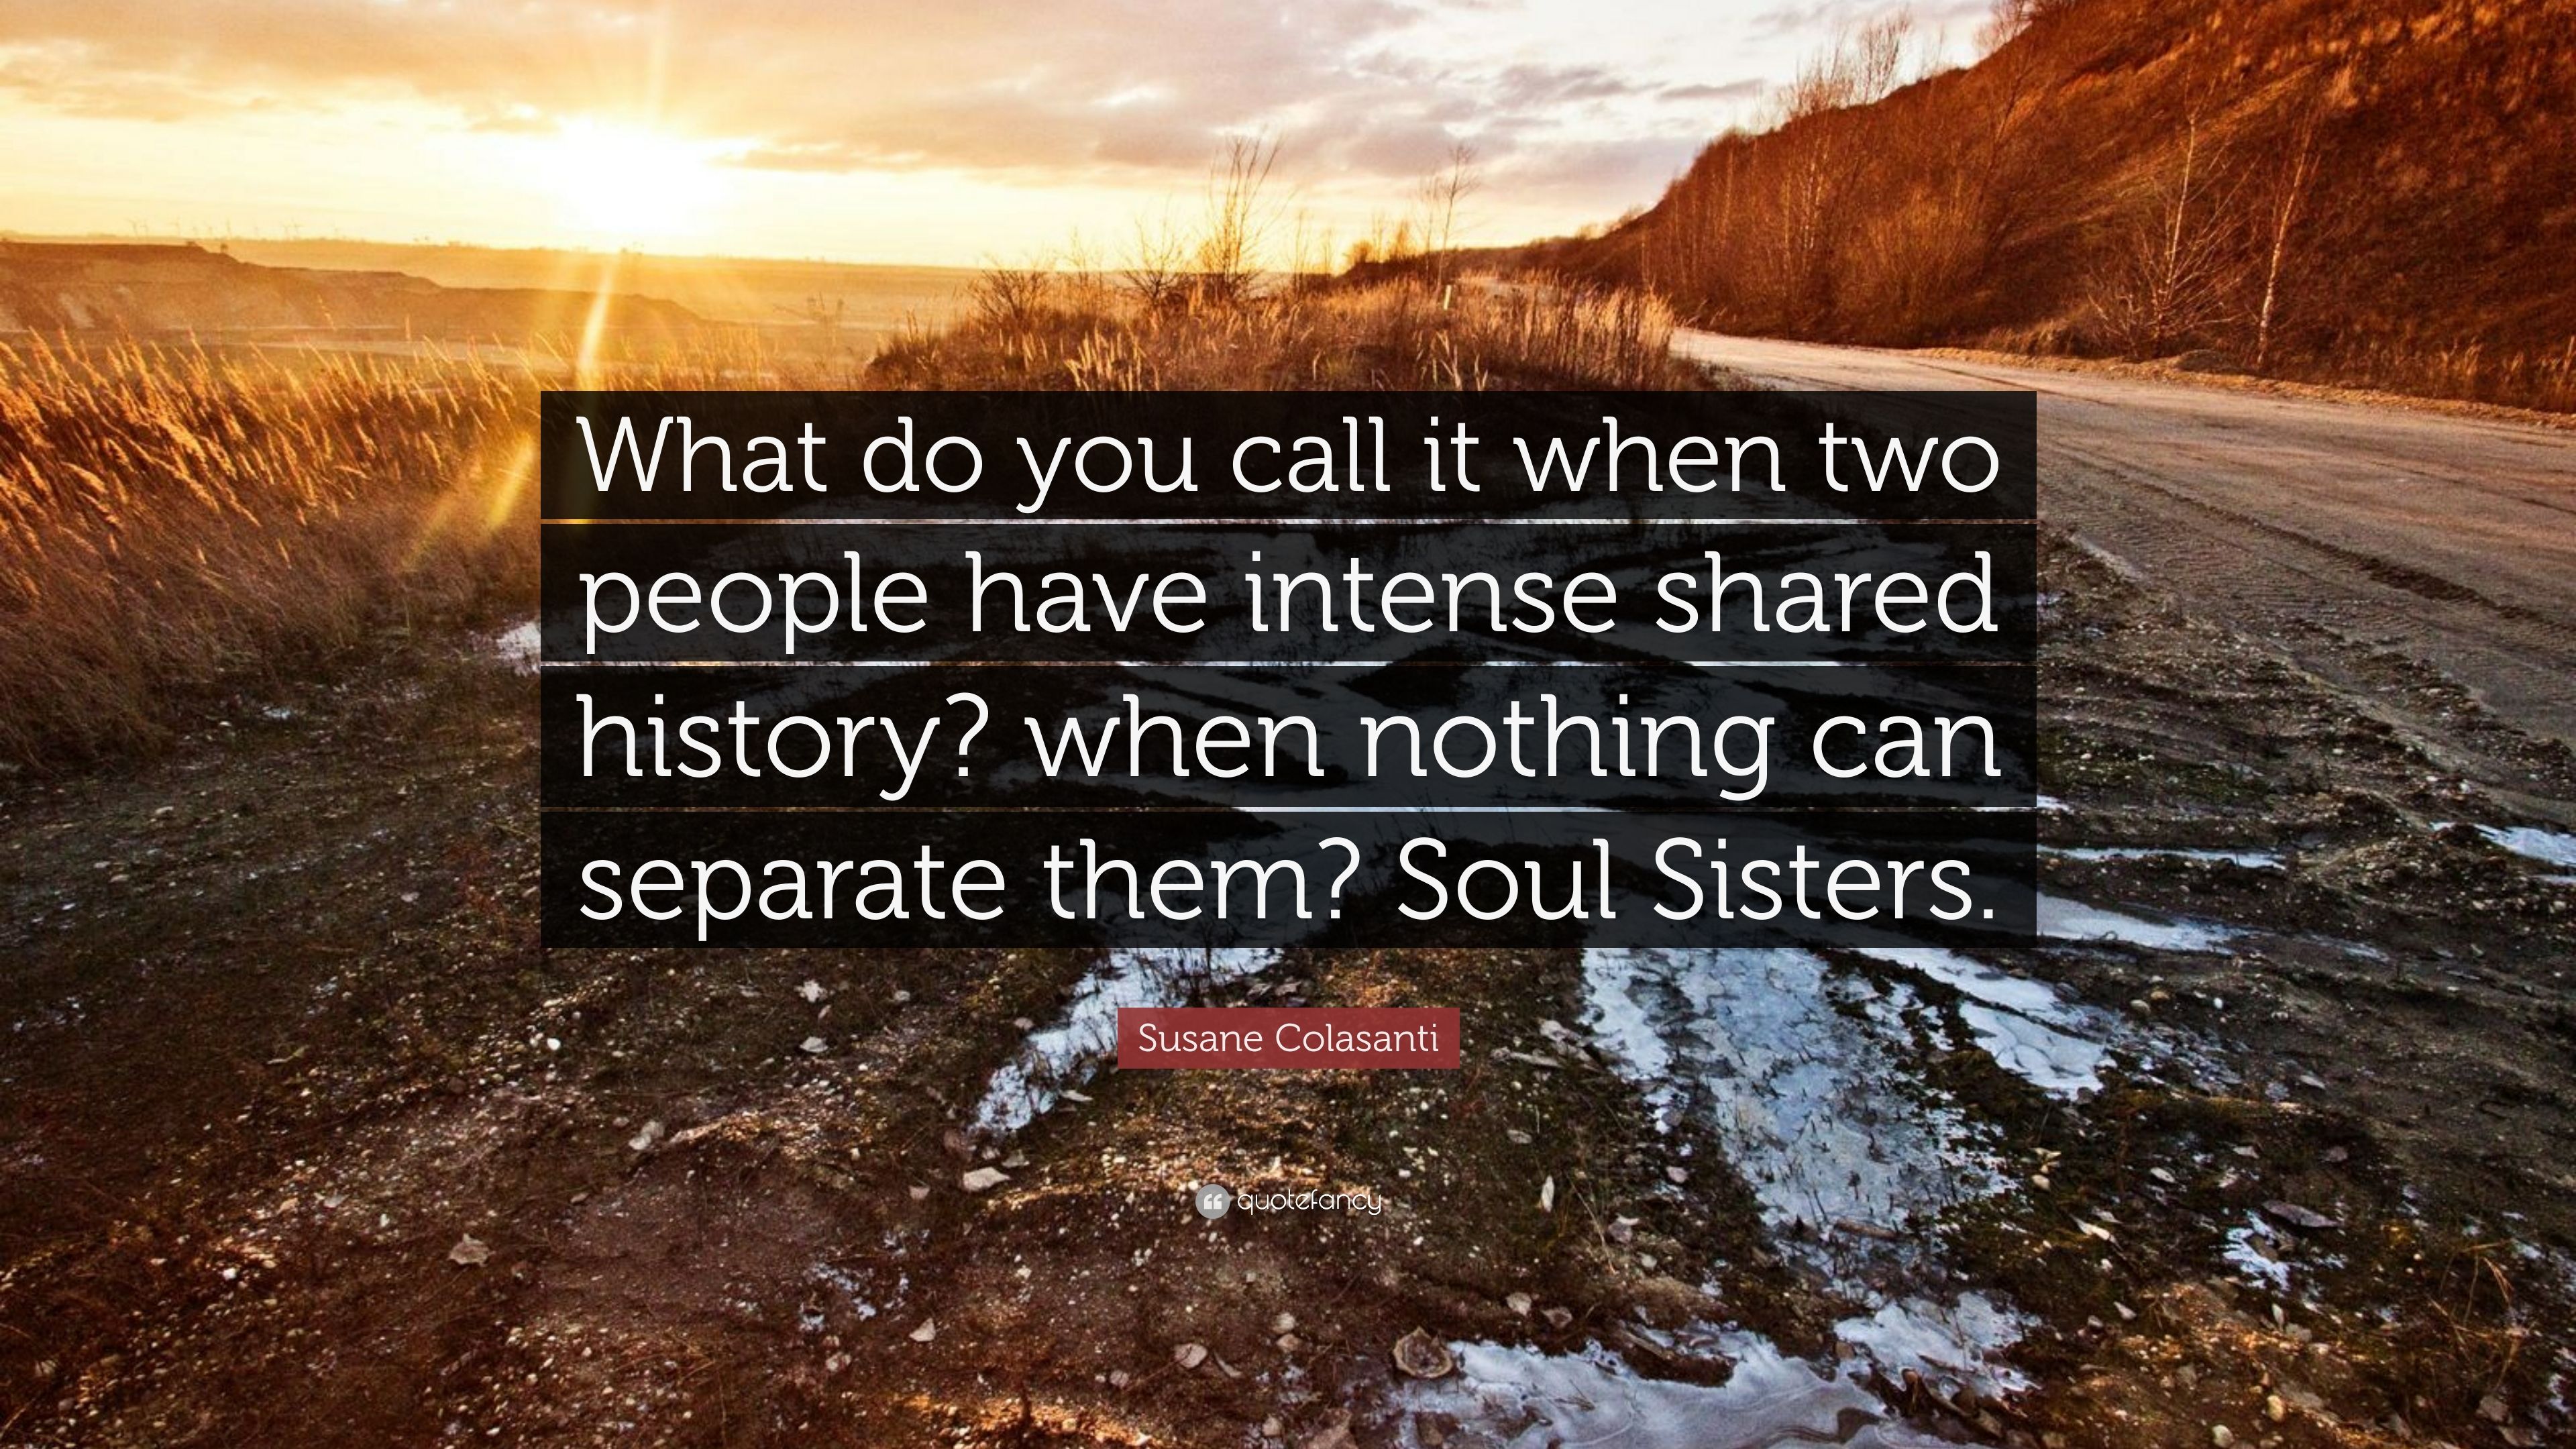 Susane Colasanti Quote: “What do you call it when two people have